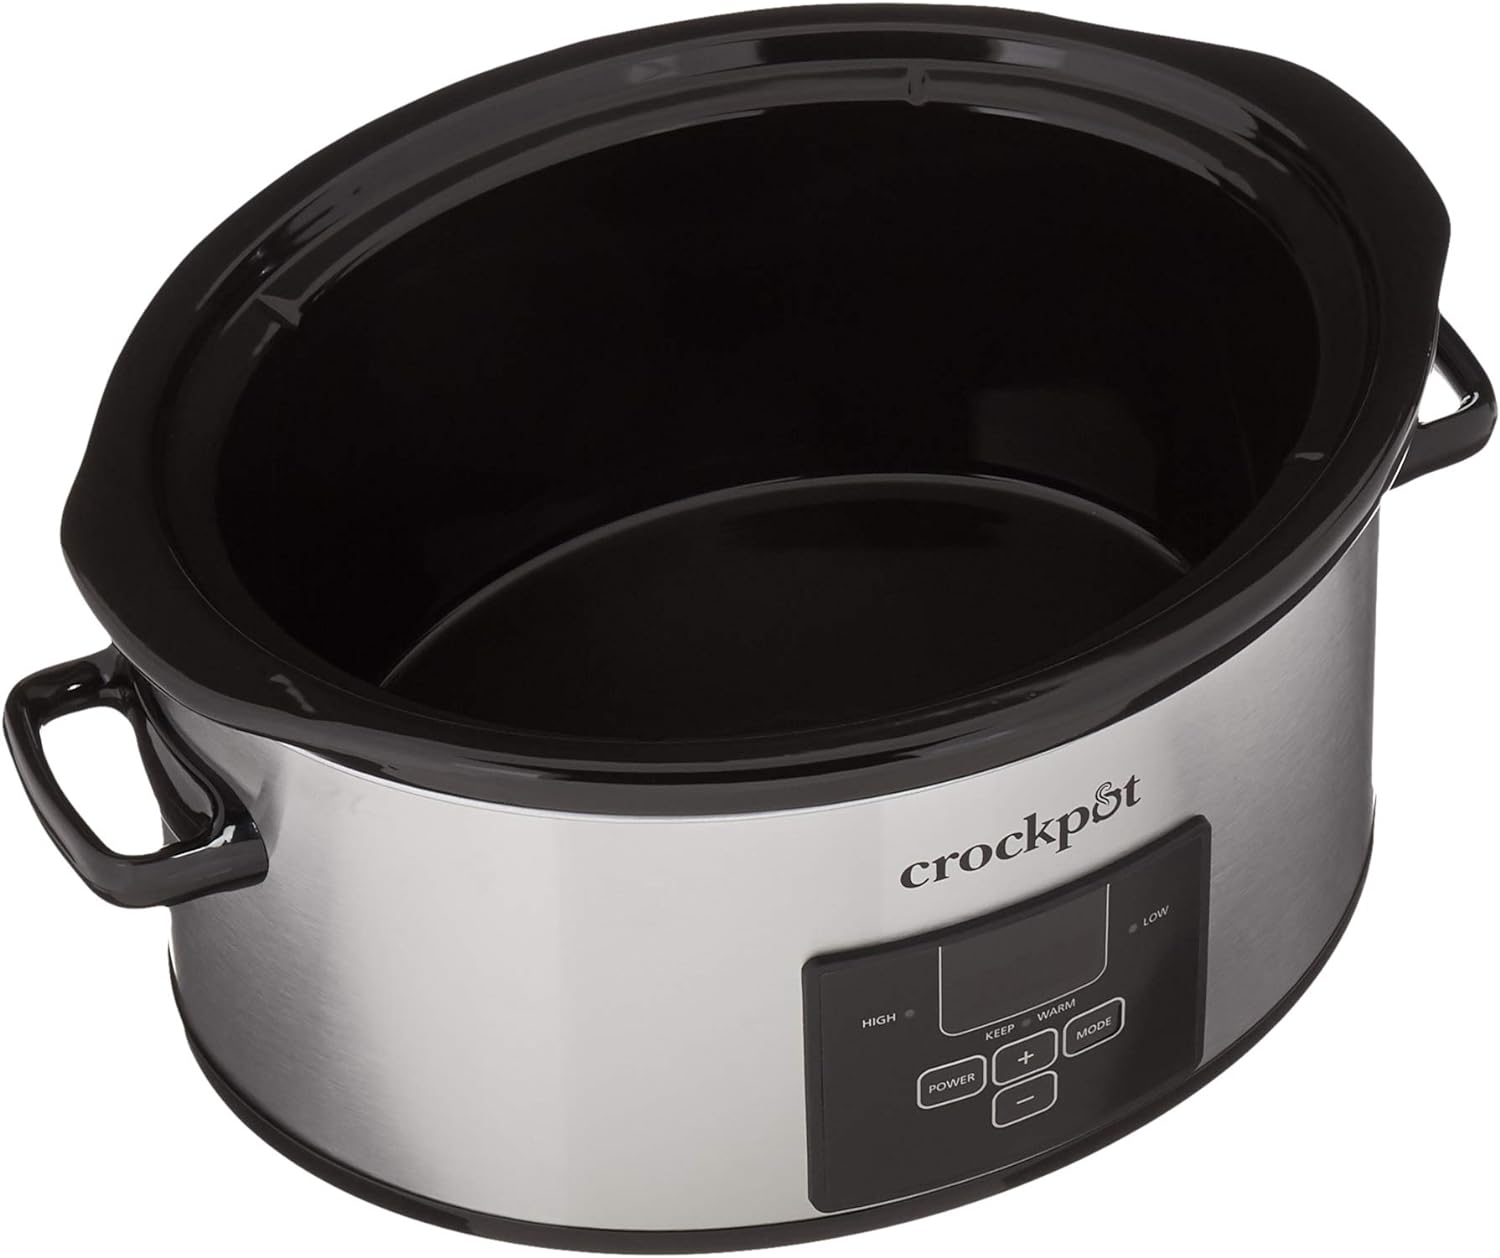 Crock-Pot Choose-a-Crock 6 Quart and Split 2.5 Quart Double Slow Cooker and Food Warmer, Programmable Slow Cooker with Timer, Stainless Steel